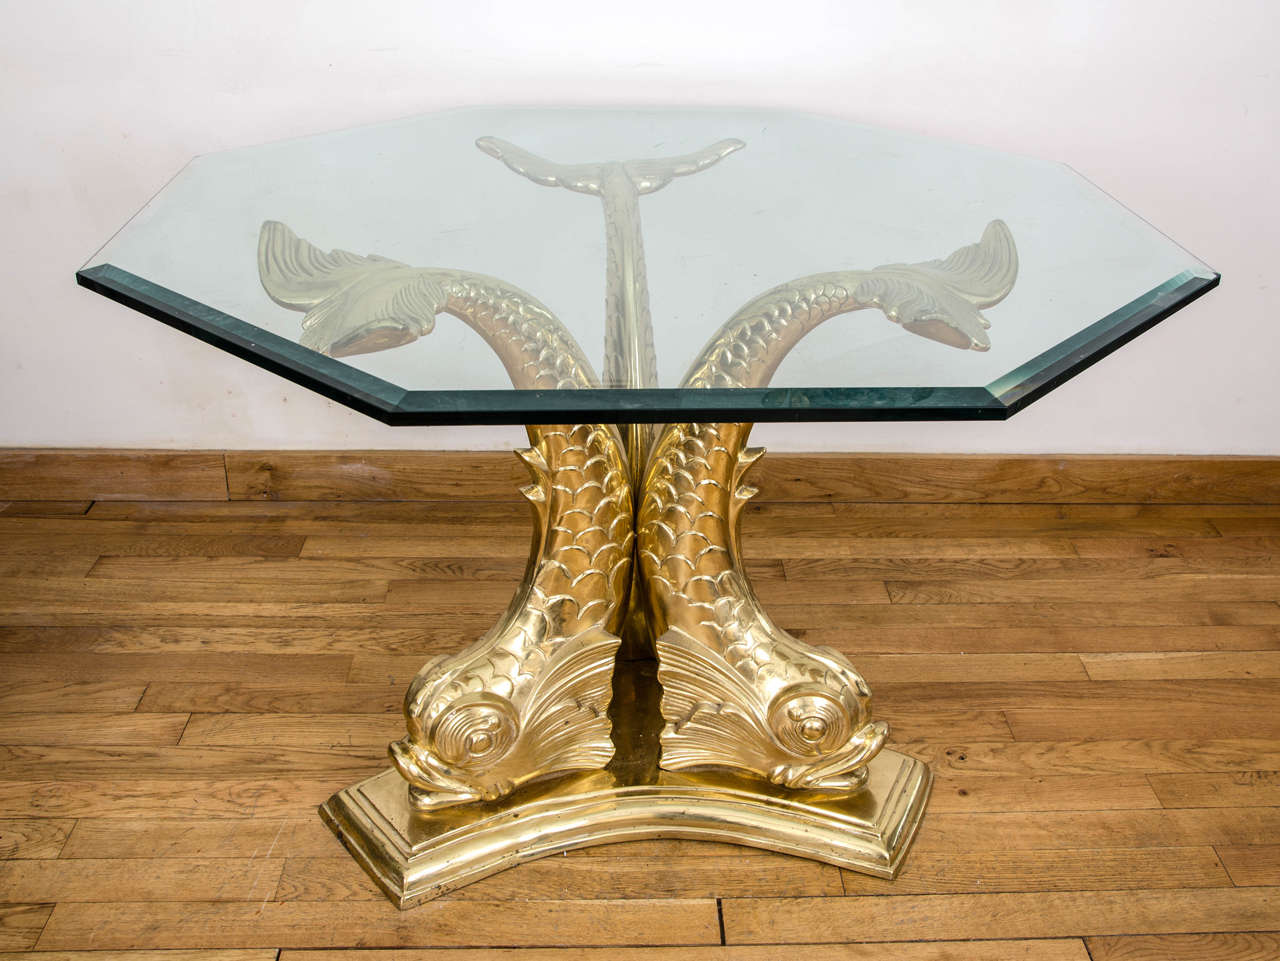 Beautiful cast brass and glass dolphin dining table.
Thick octagonal detachable glass tabletop.